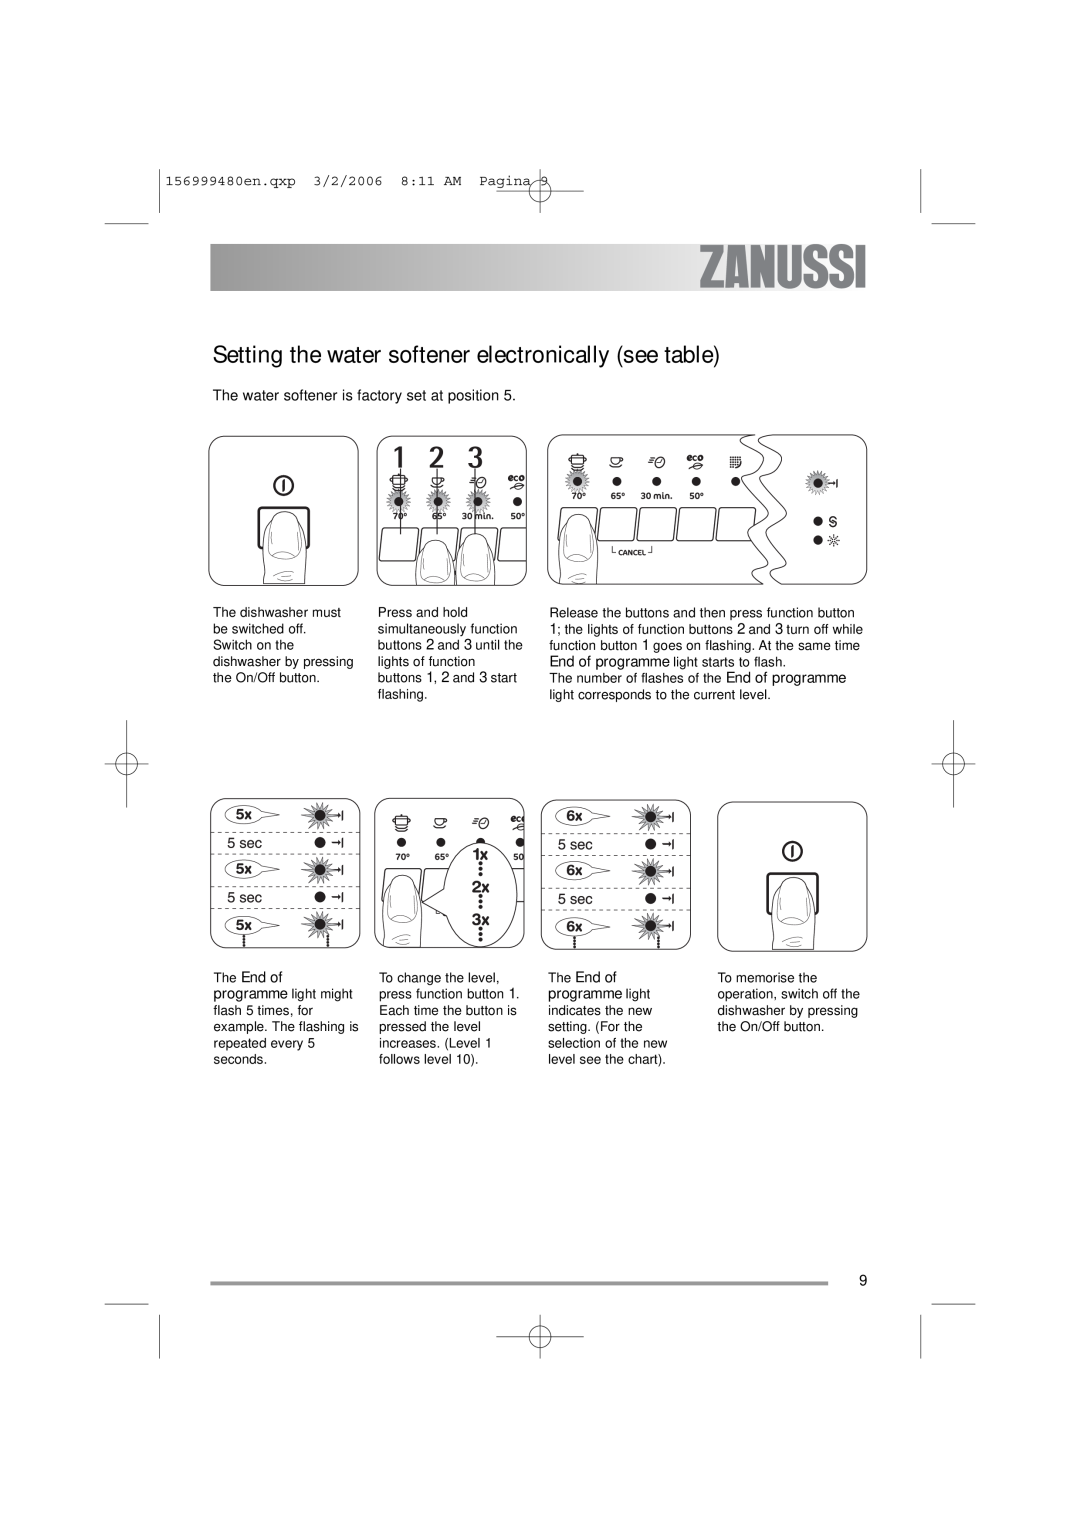 Zanussi ZDF311 Setting the water softener electronically see table, Release the buttons and then press function button 